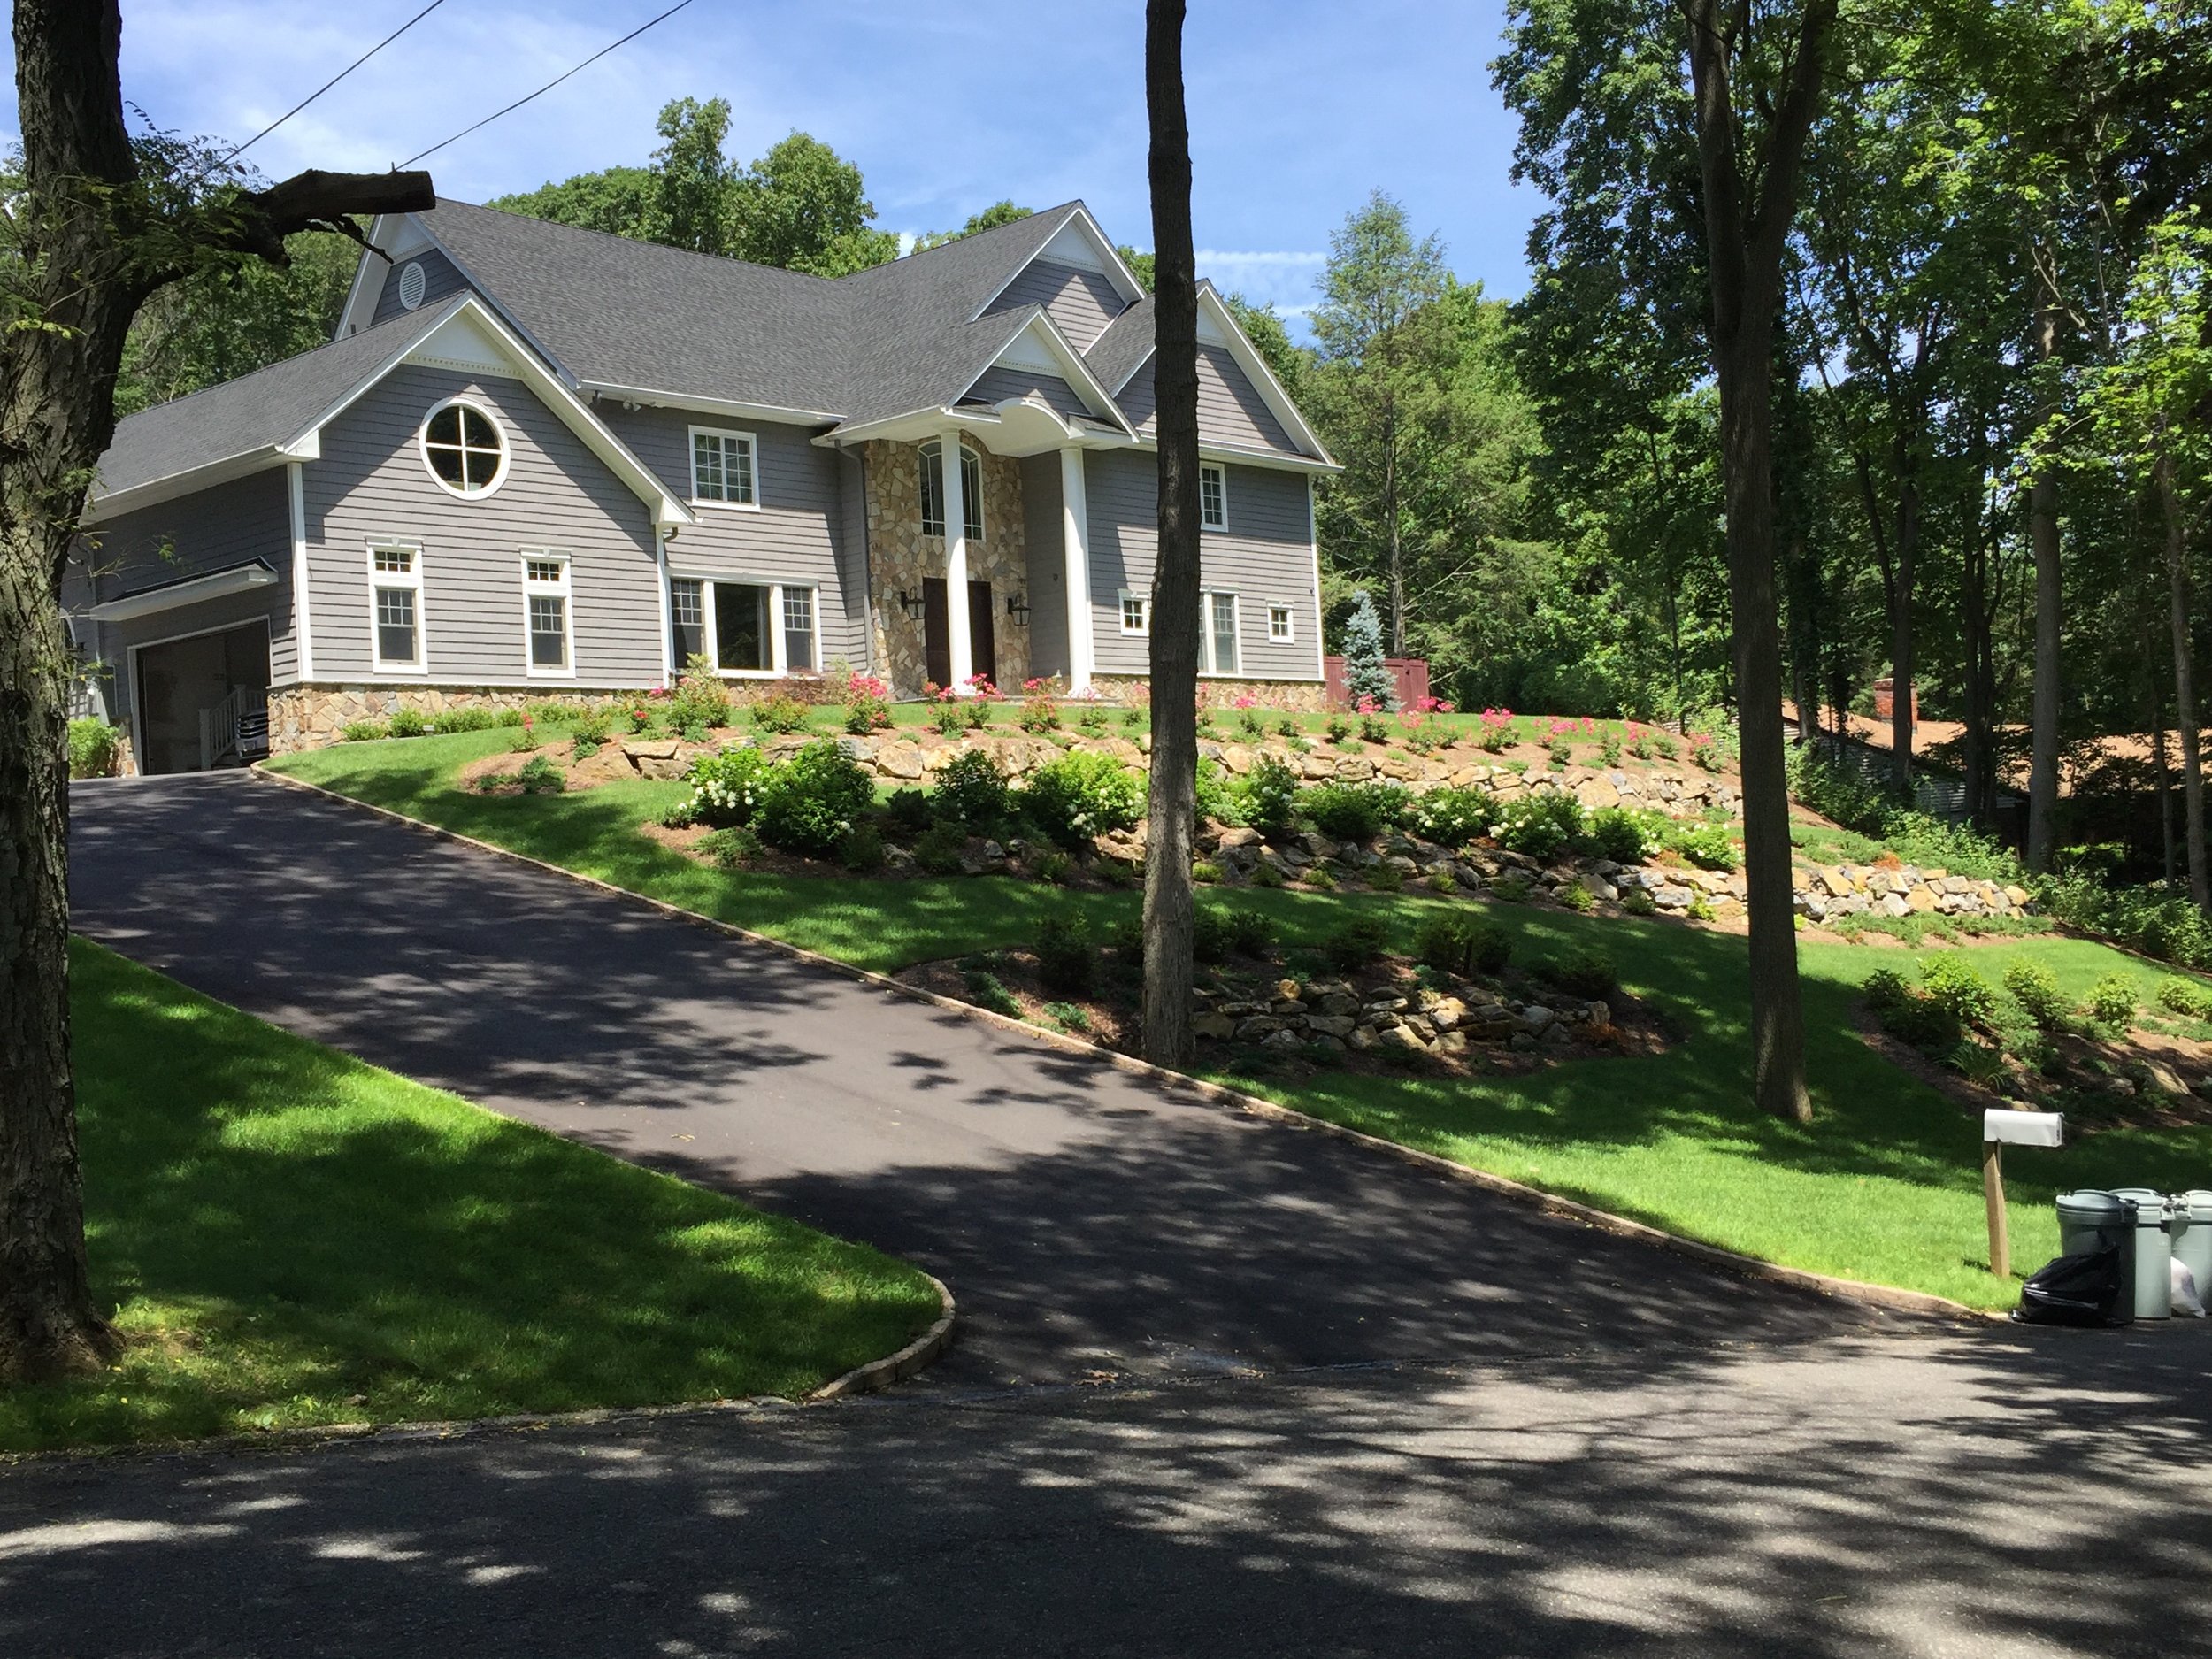 Professional driveway landscape design company in Long Island, NY